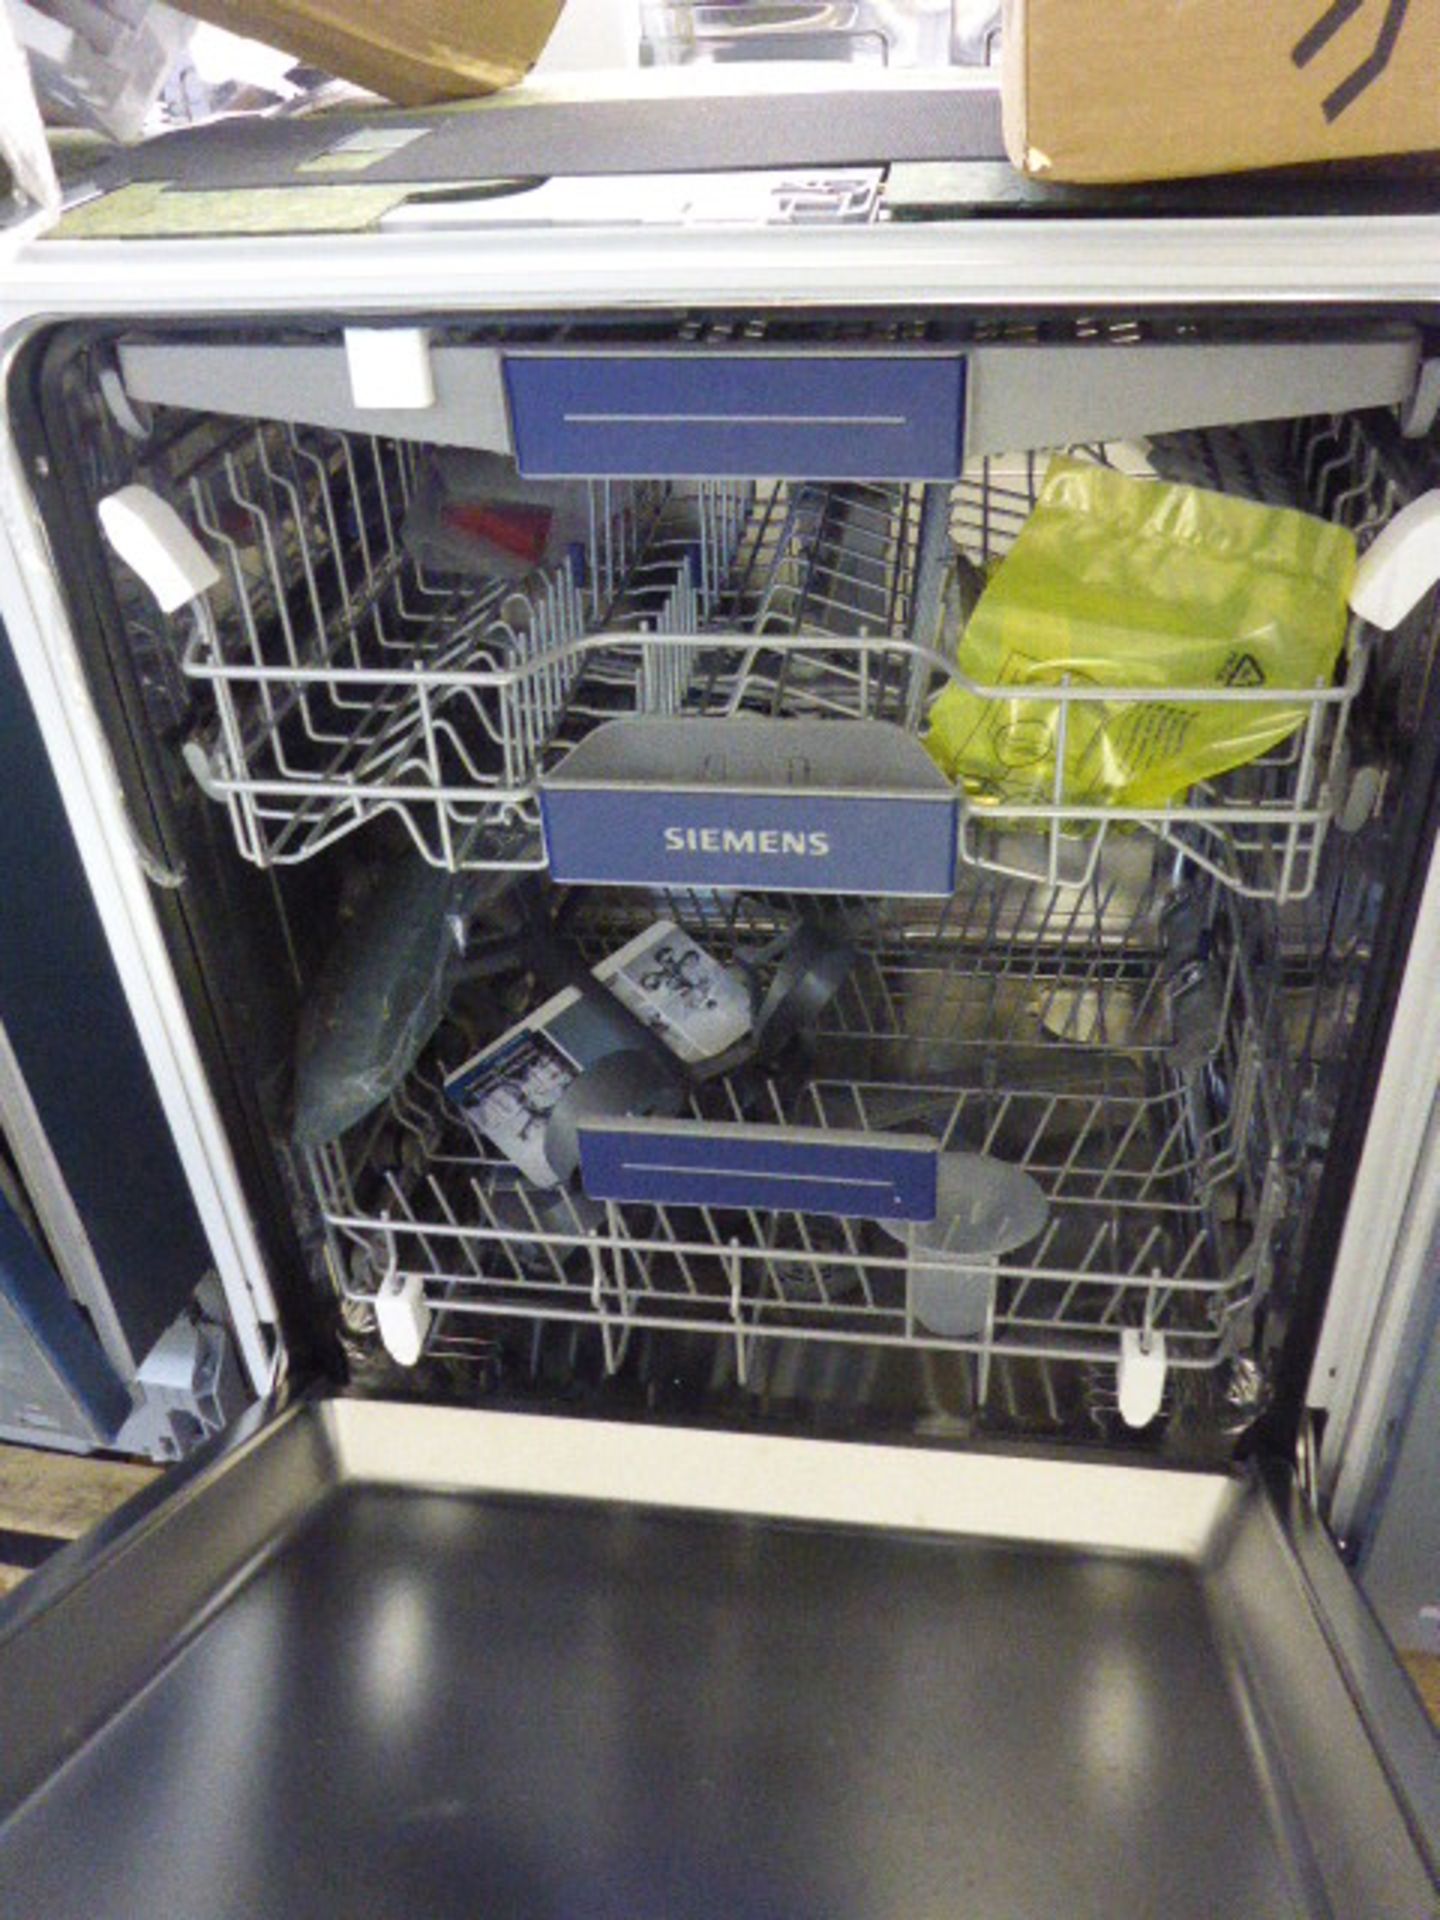 SN658D02MGB Siemens Dishwasher fully integrated - Image 2 of 2